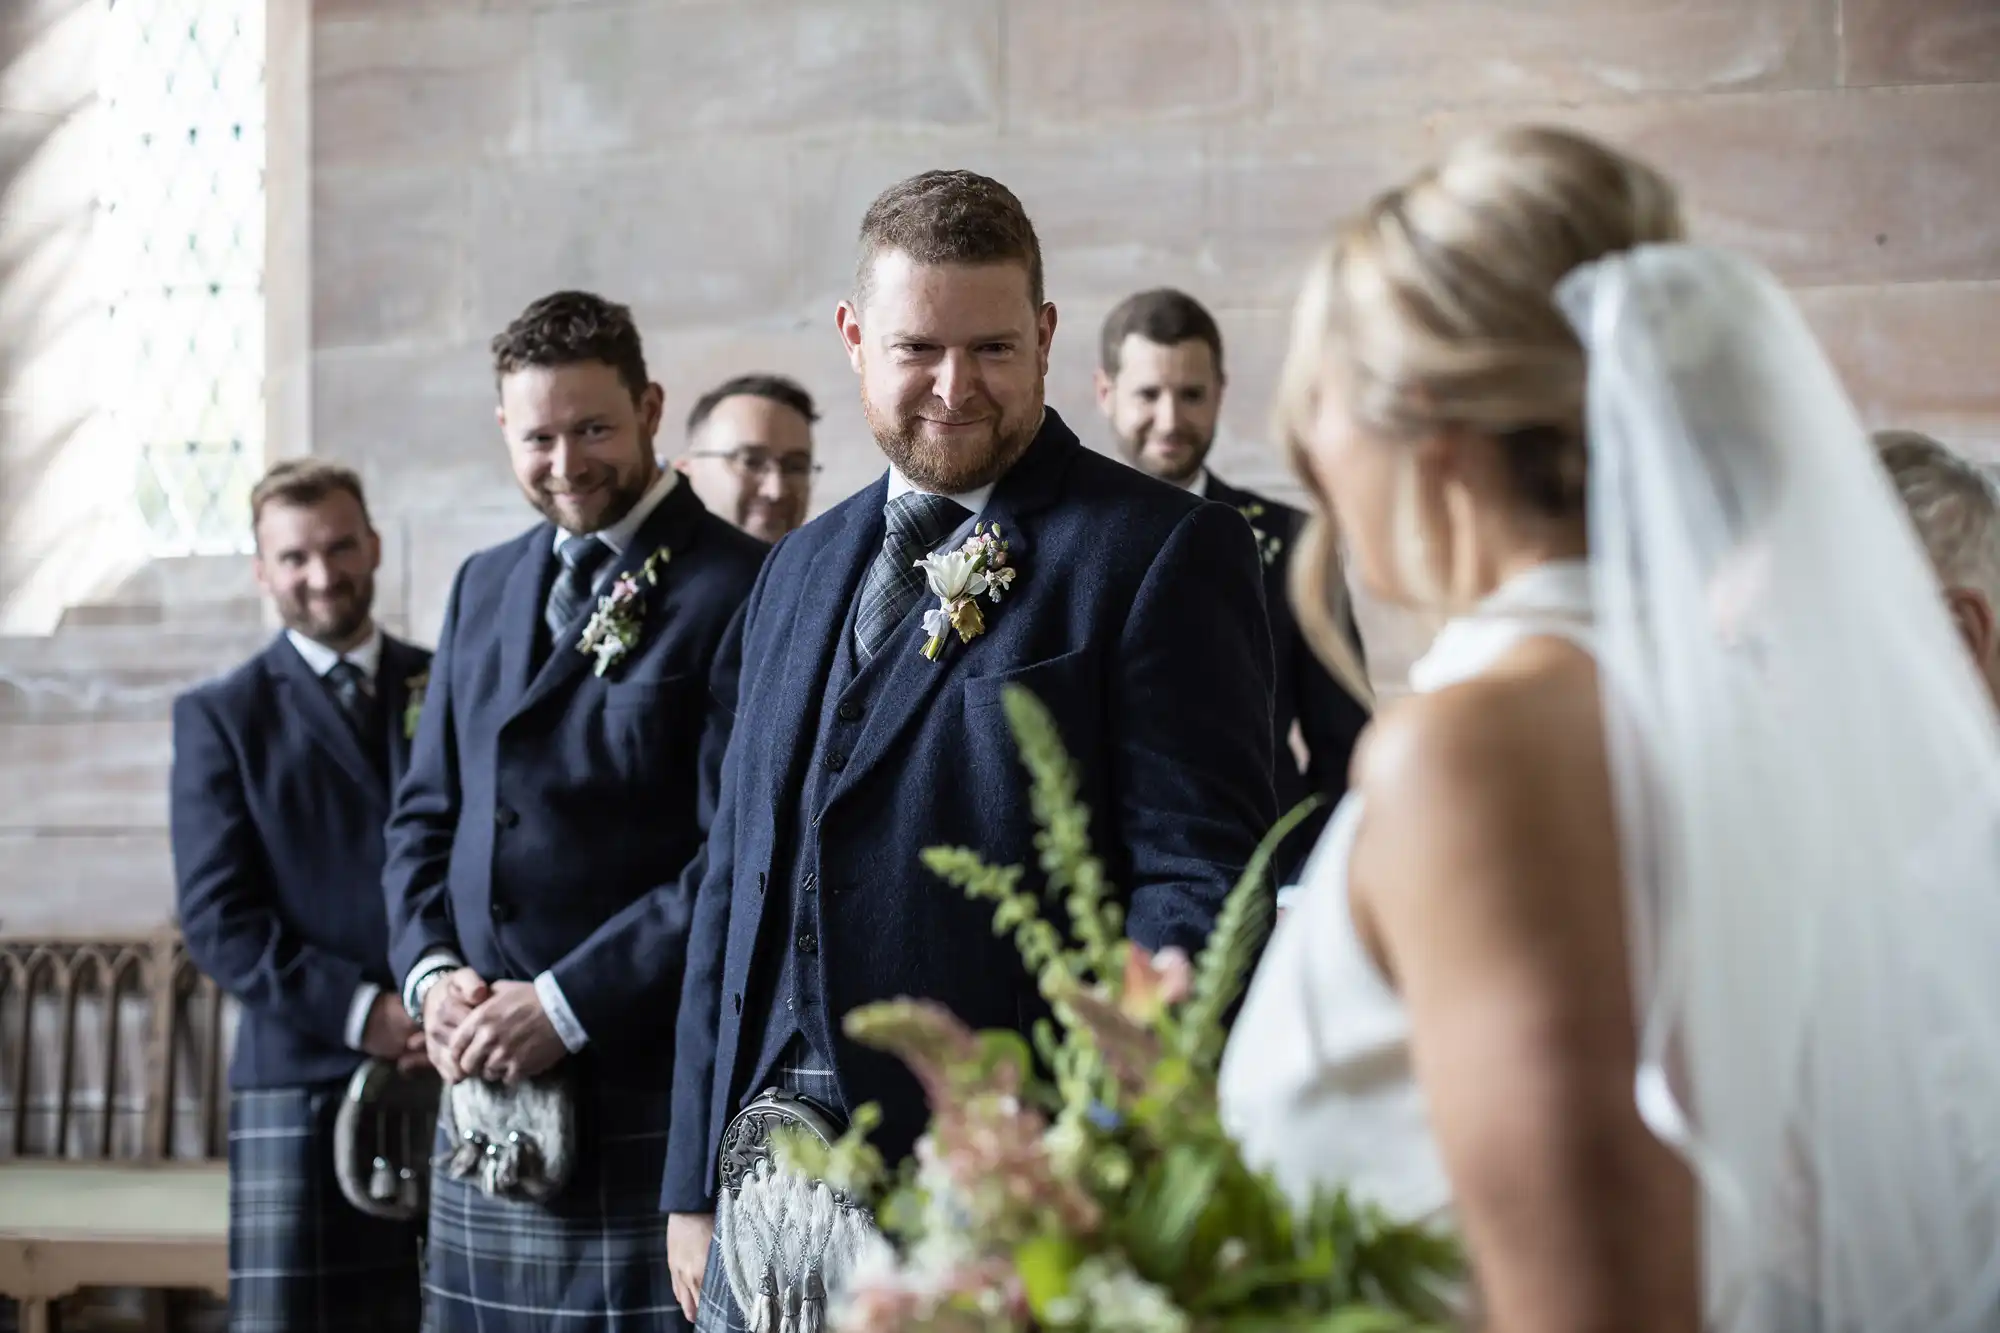 A groom in a blue suit and kilt smiles at the bride during a wedding ceremony in a church, with guests in kilts watching in the background.